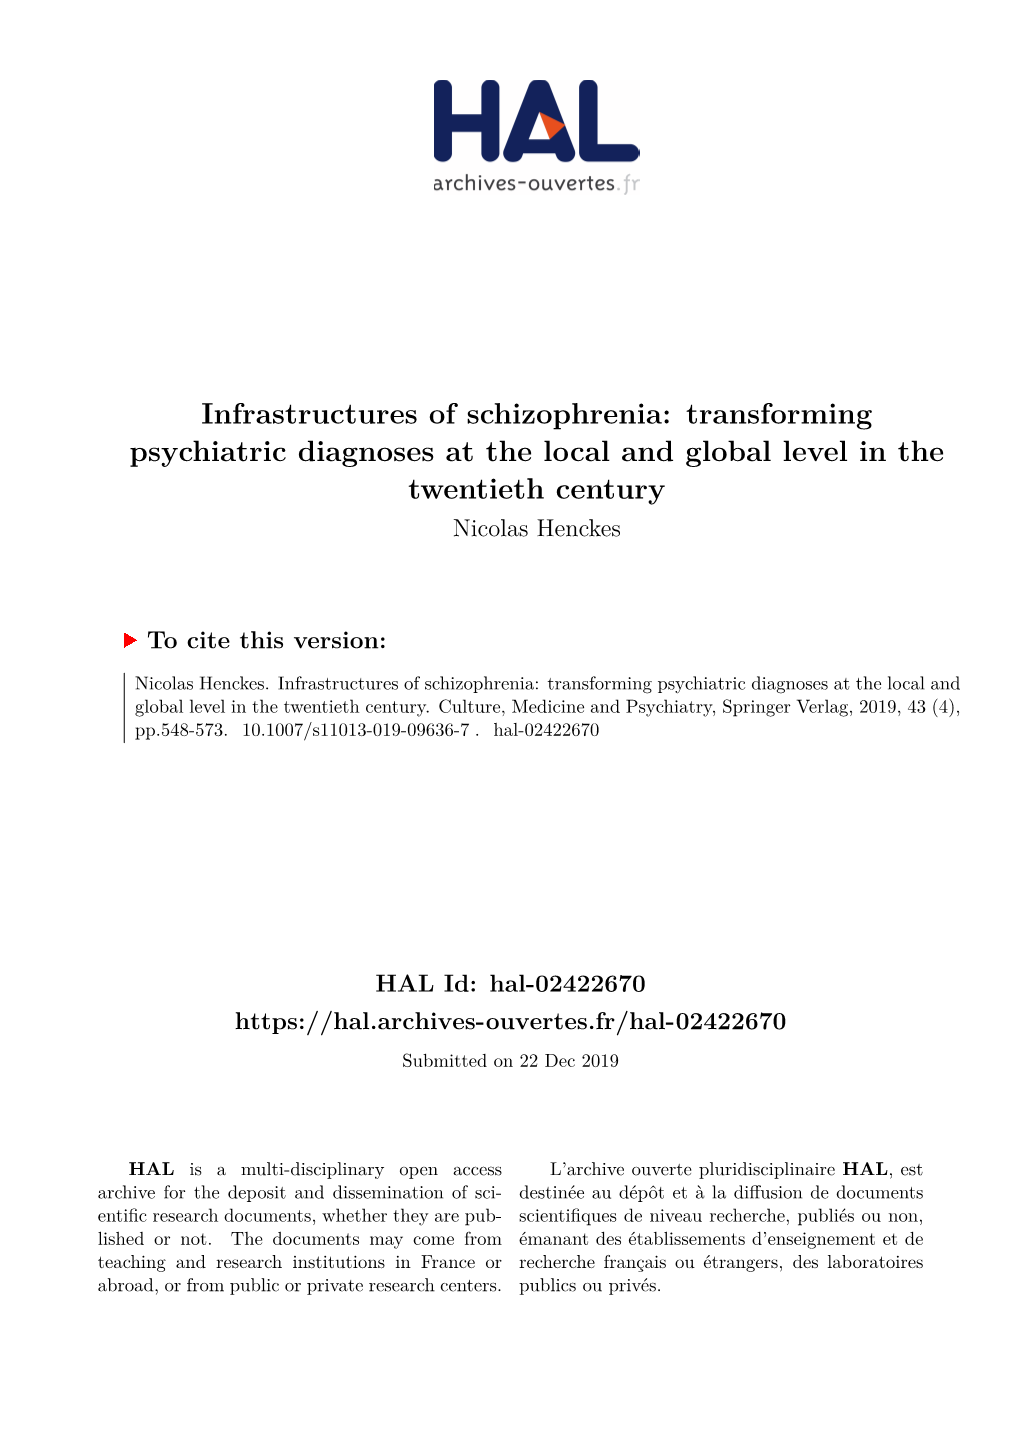 Infrastructures of Schizophrenia: Transforming Psychiatric Diagnoses at the Local and Global Level in the Twentieth Century Nicolas Henckes